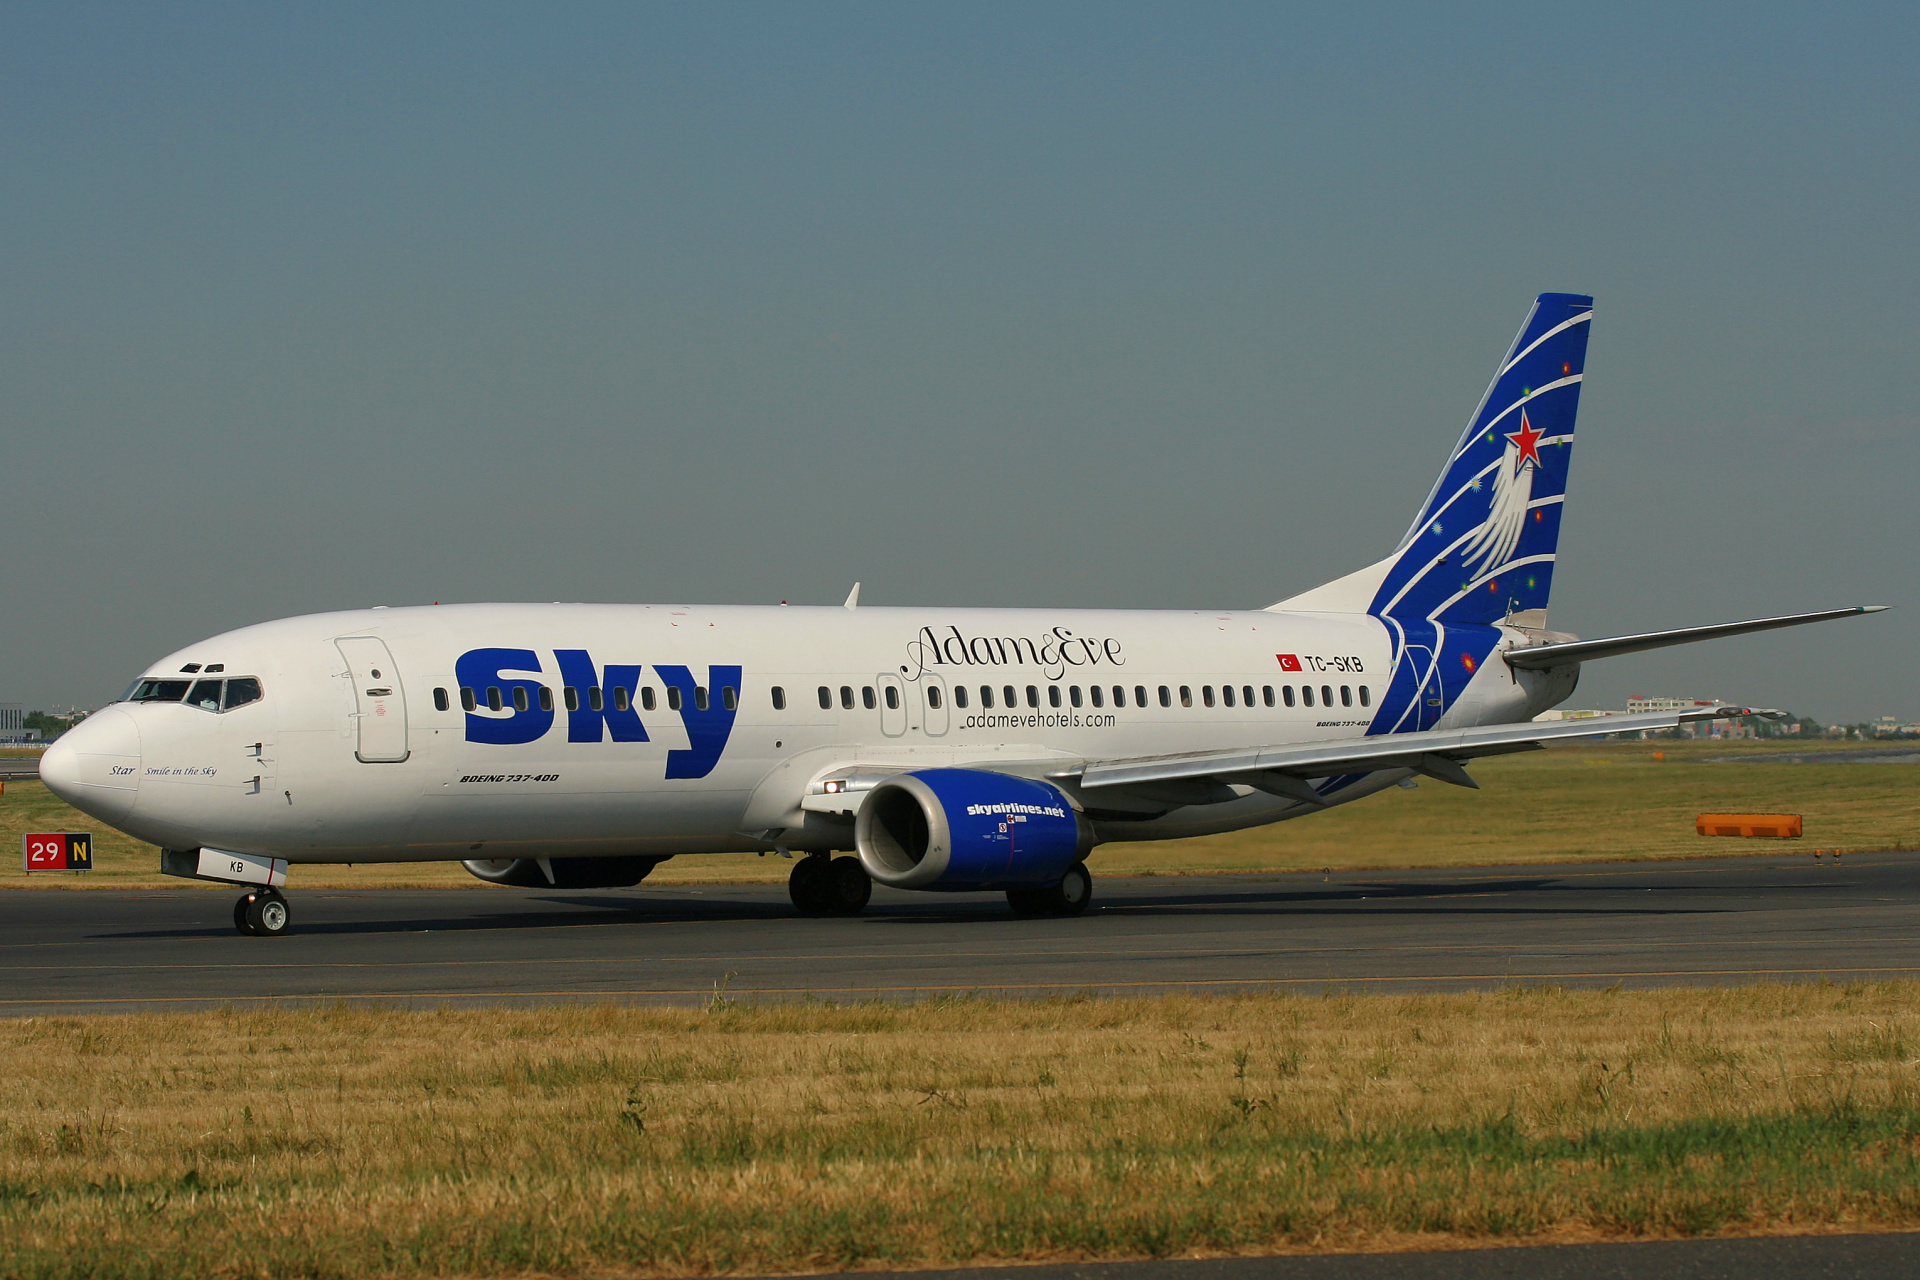 TC-SKB, Sky Airlines (Adam and Eve livery) (Aircraft » EPWA Spotting » Boeing 737-400)